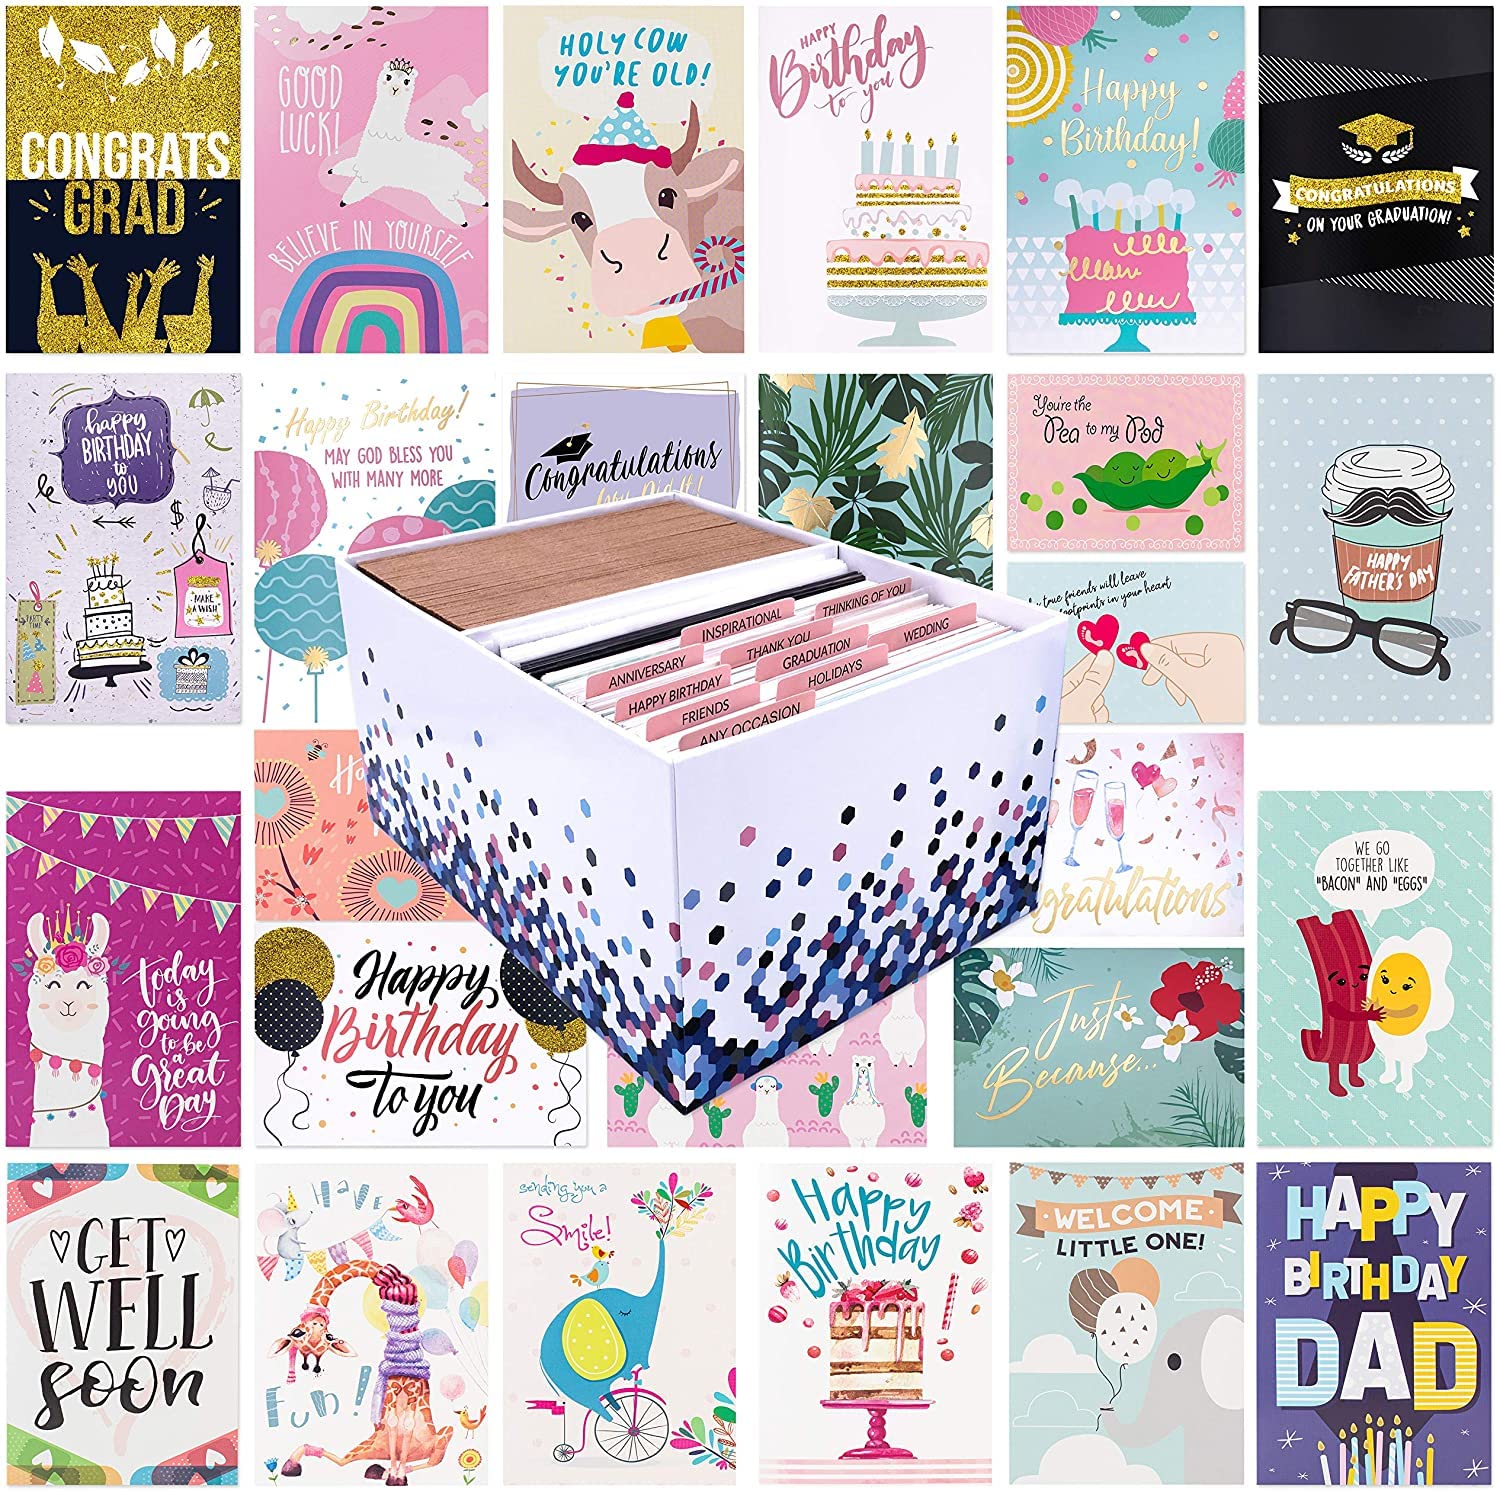 100 All Occasion Greeting Cards- 100 Eye Catching Designs with Greeting Card Organizer Box- Friendship Cards, Anniversary Cards, BFF Cards, Thanks Cards, Wedding Cards & More- 4 x 6 with 100 Envelopes